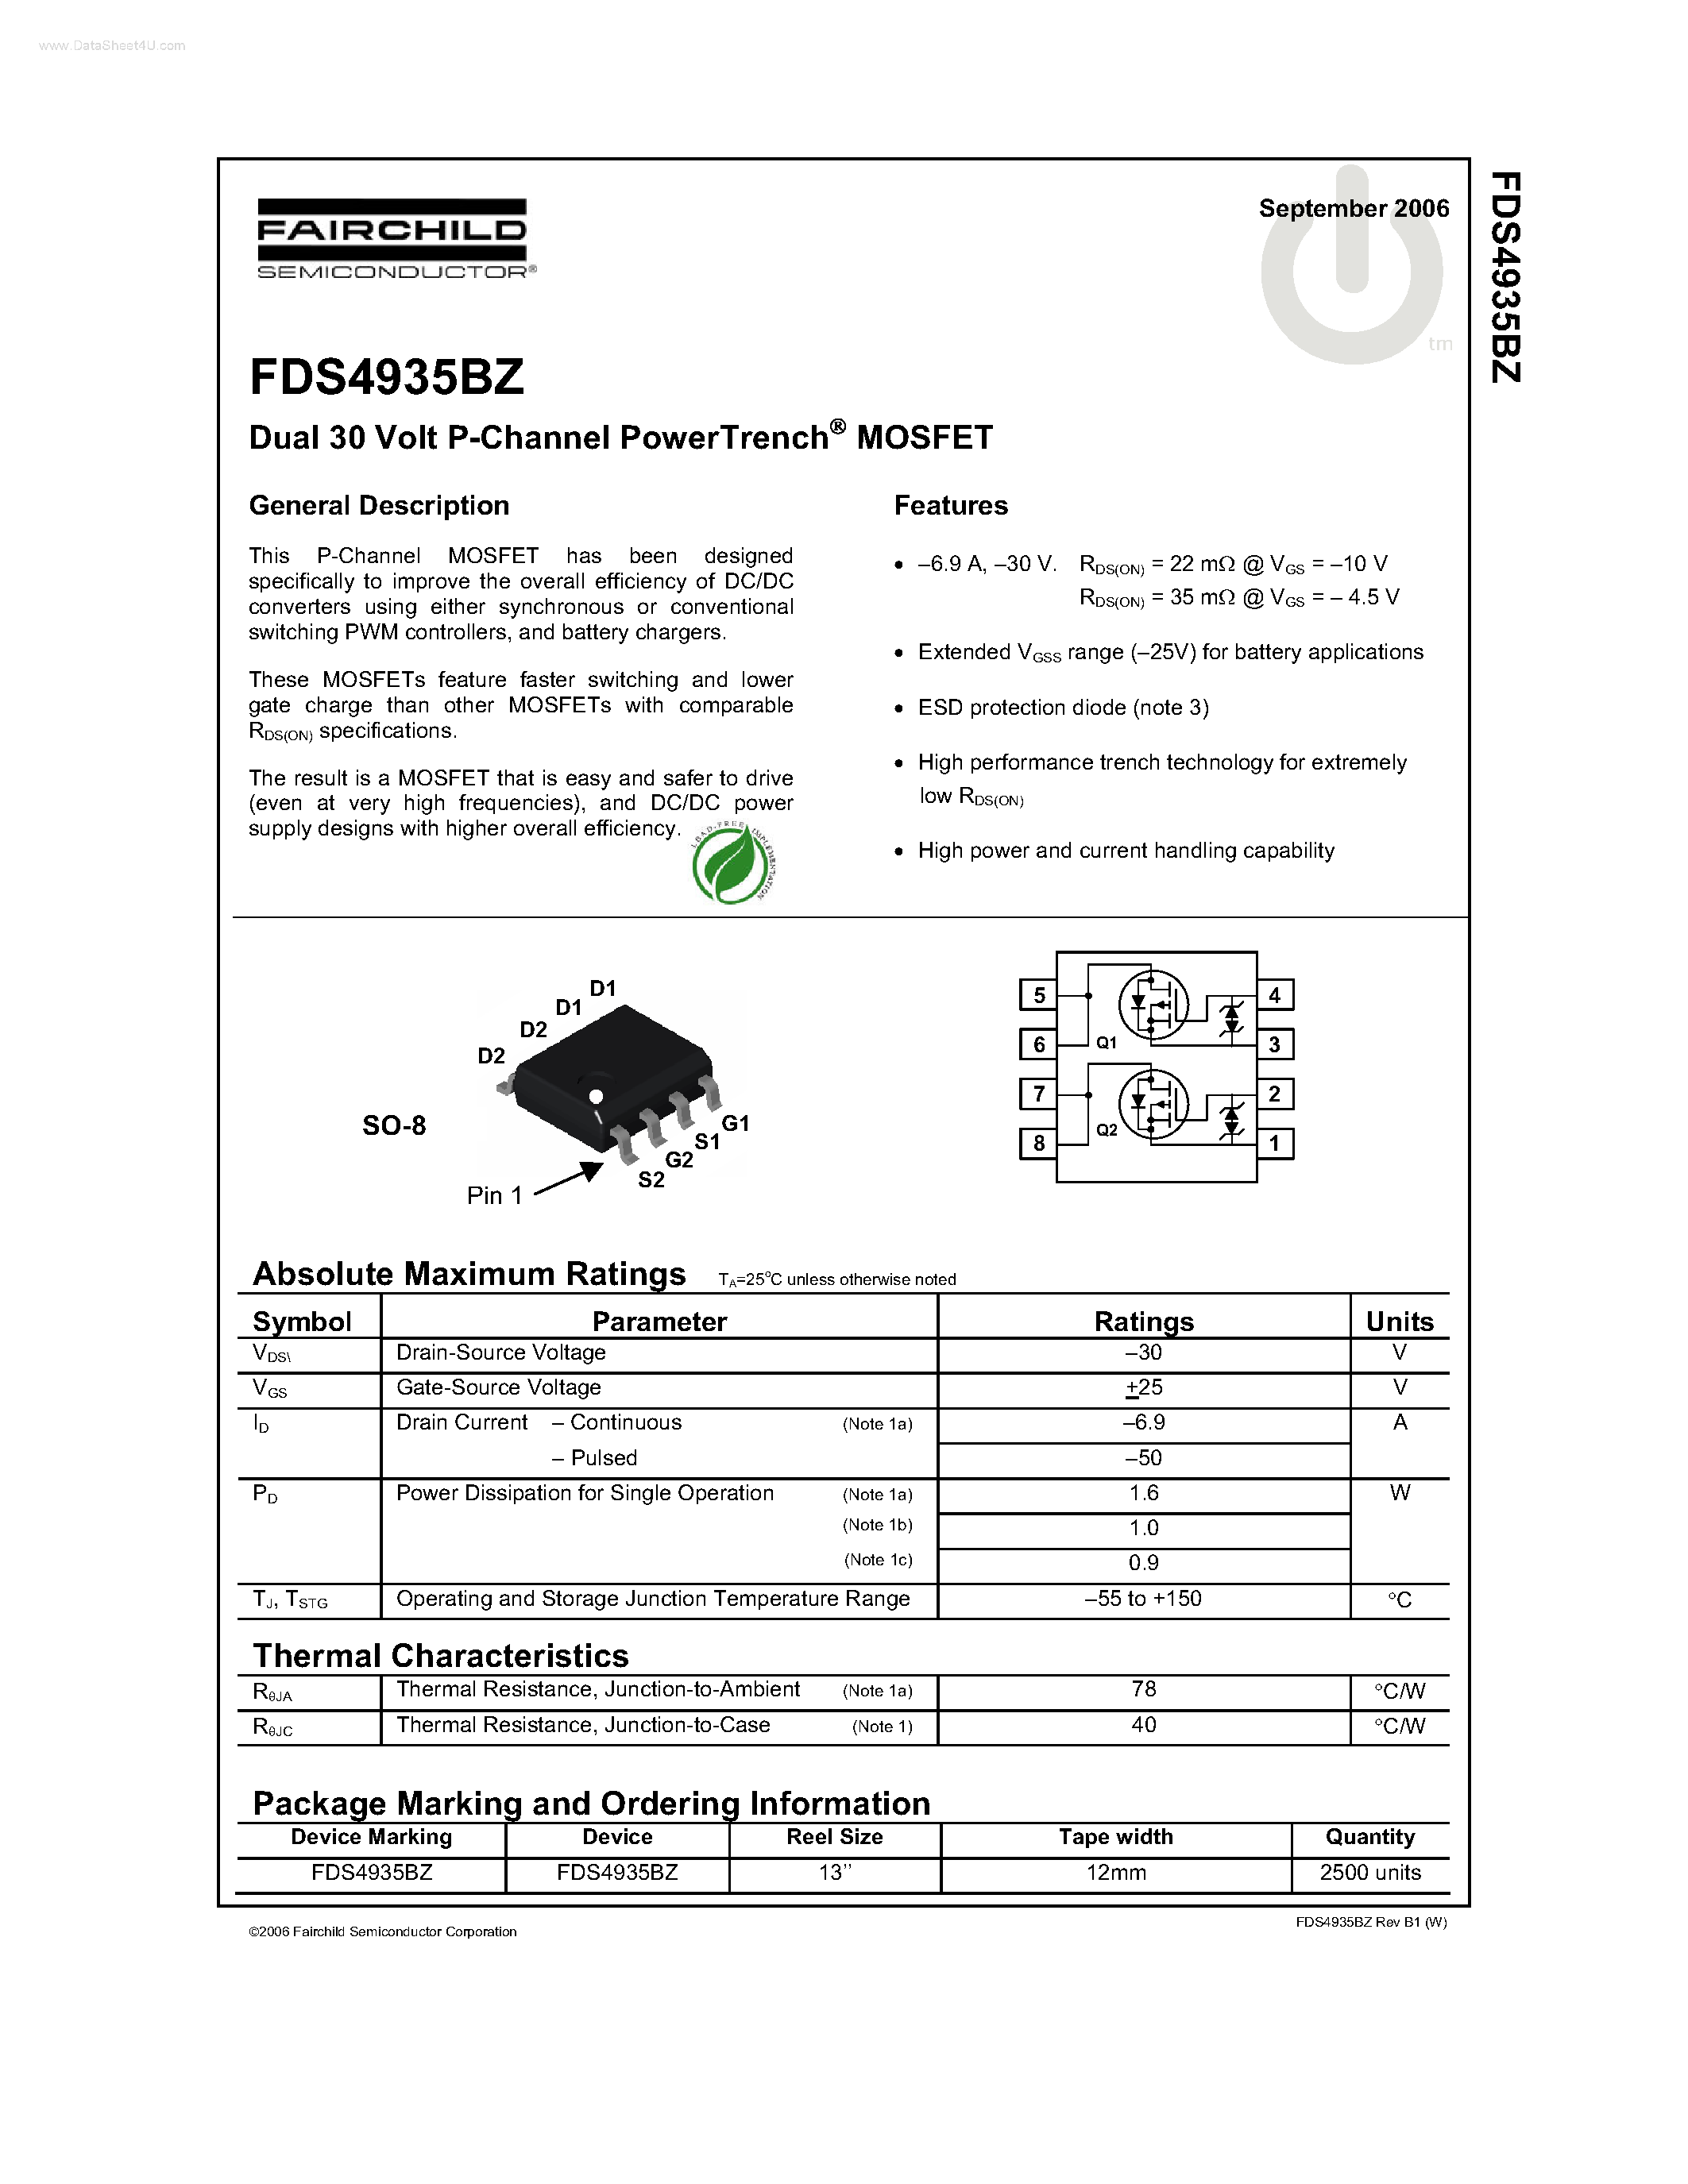 Datasheet FDS4935BZ - Dual 30 Volt P-Channel PowerTrench MOSFET page 1